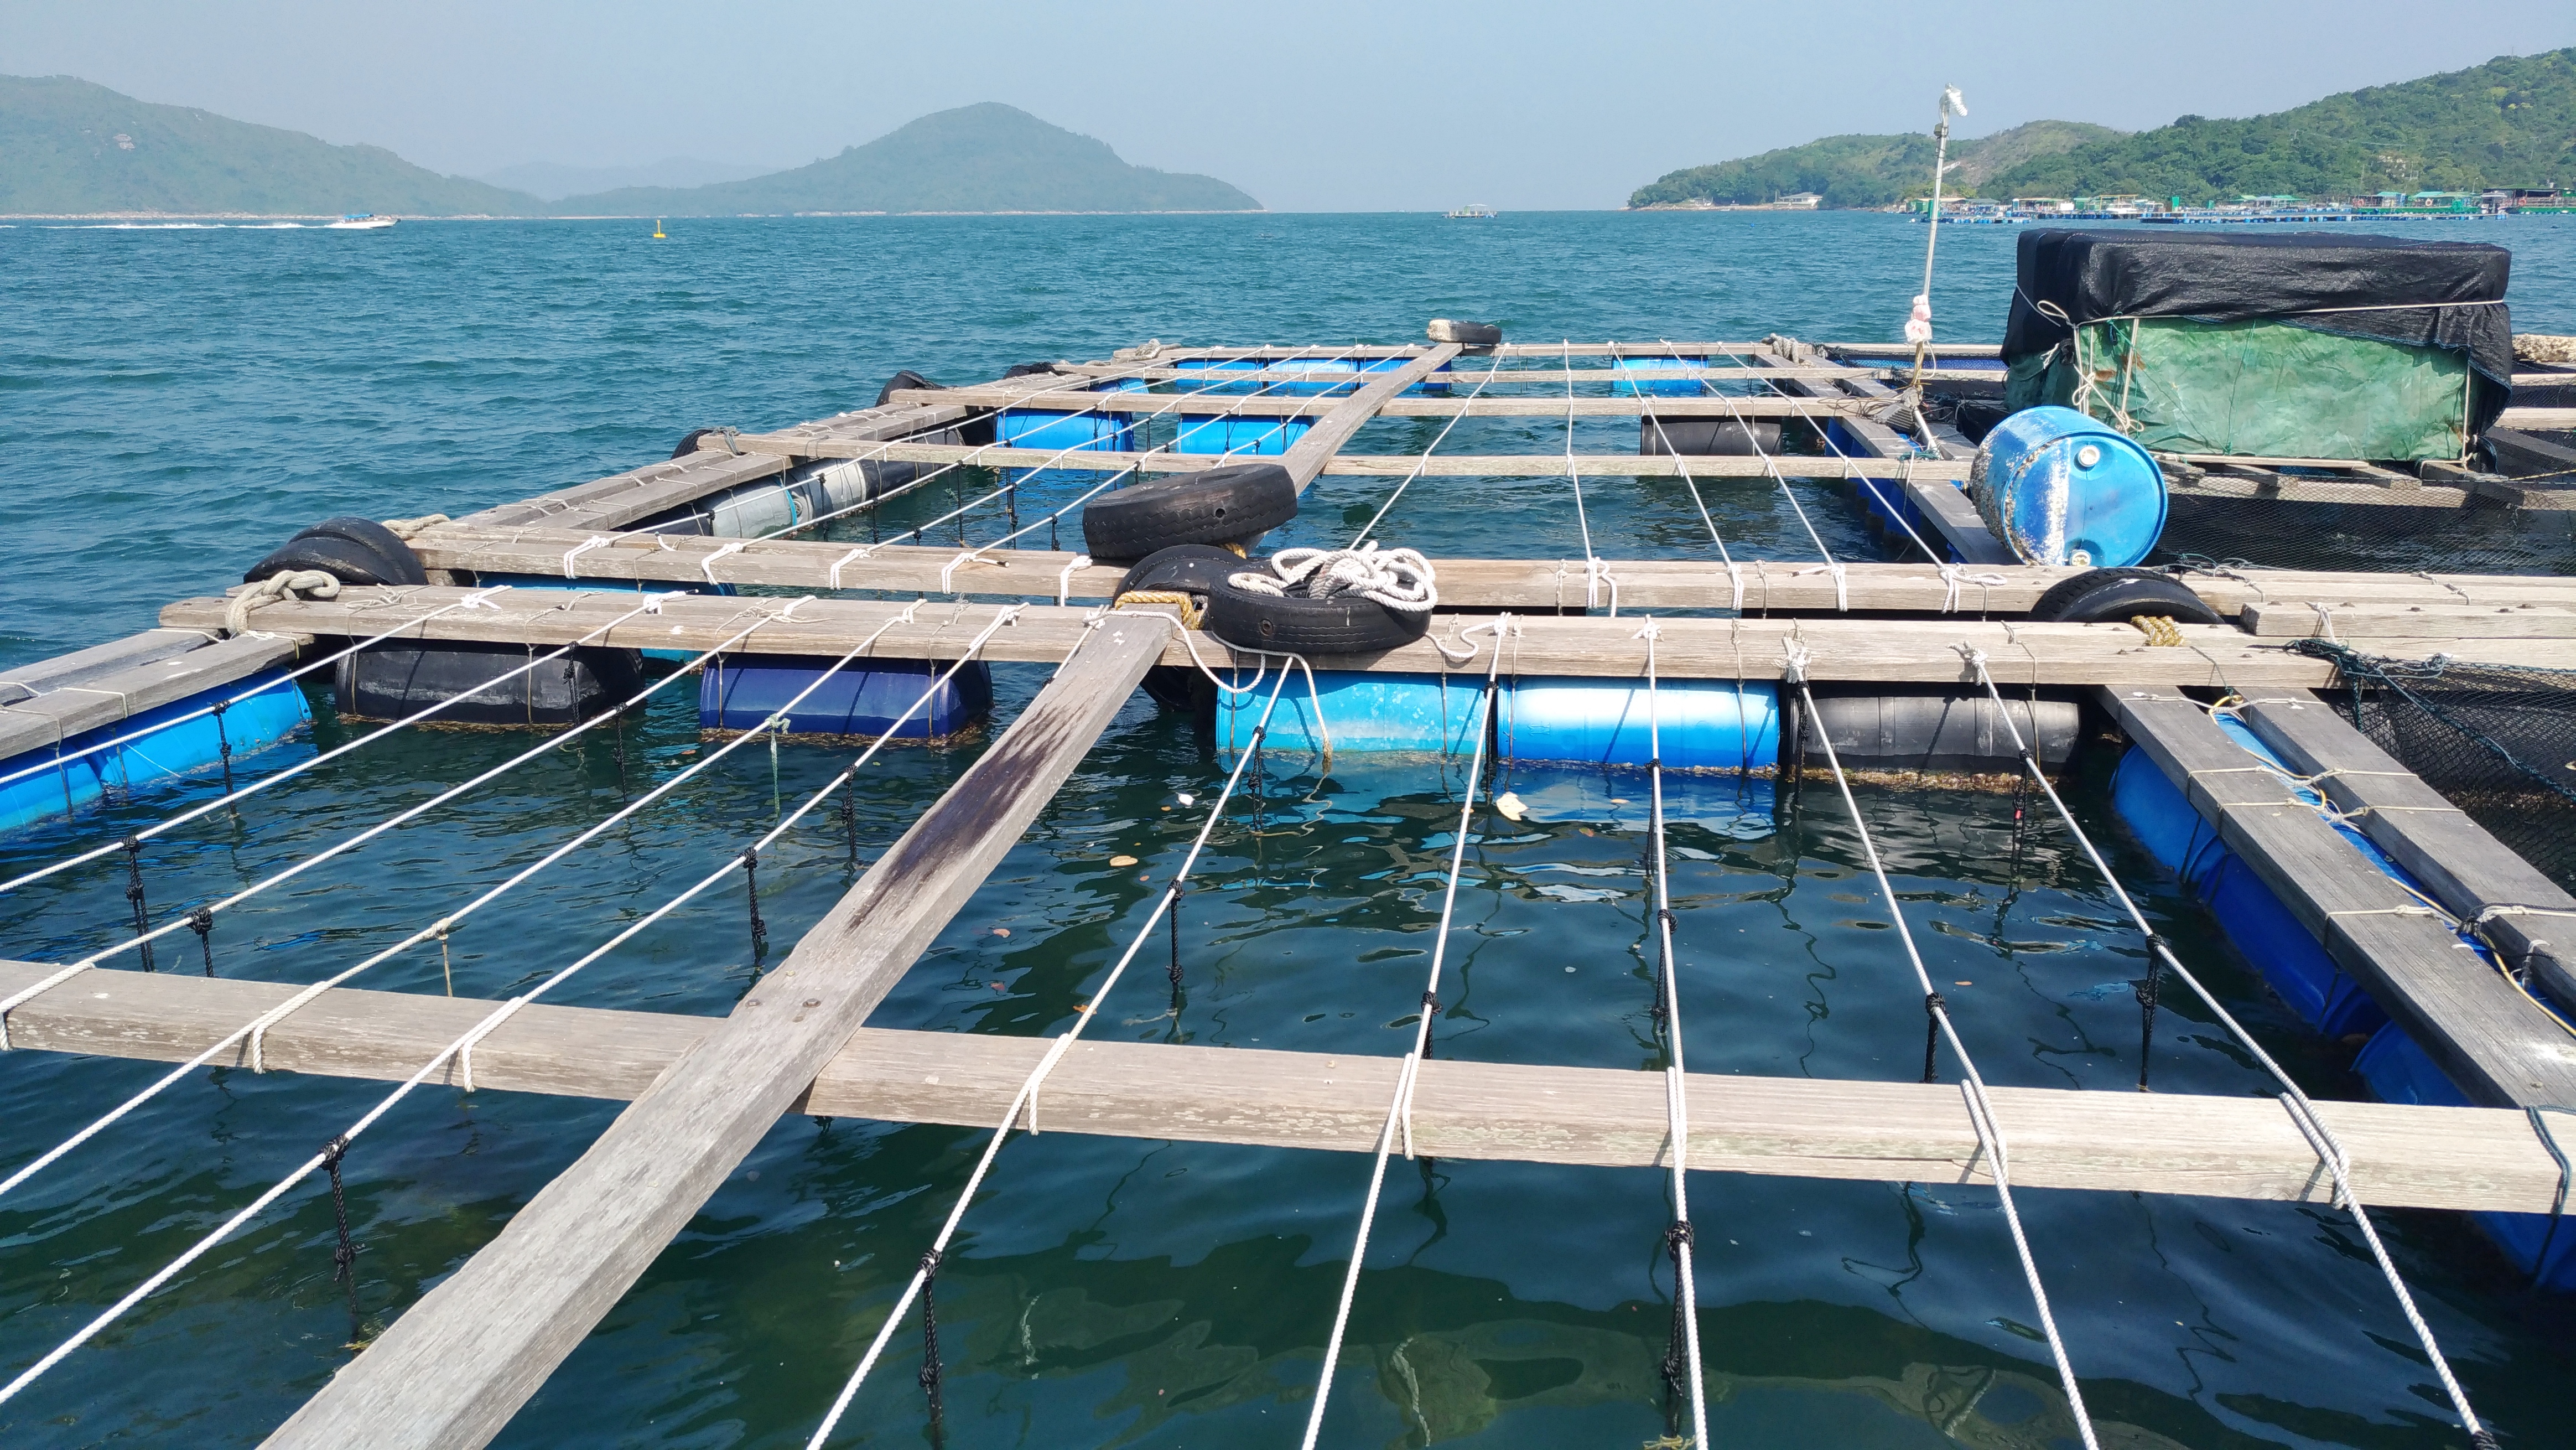 30 000 pearl oysters have been cultured in waters of Sum Wan Tsai area of Sai Kung over the past three years.